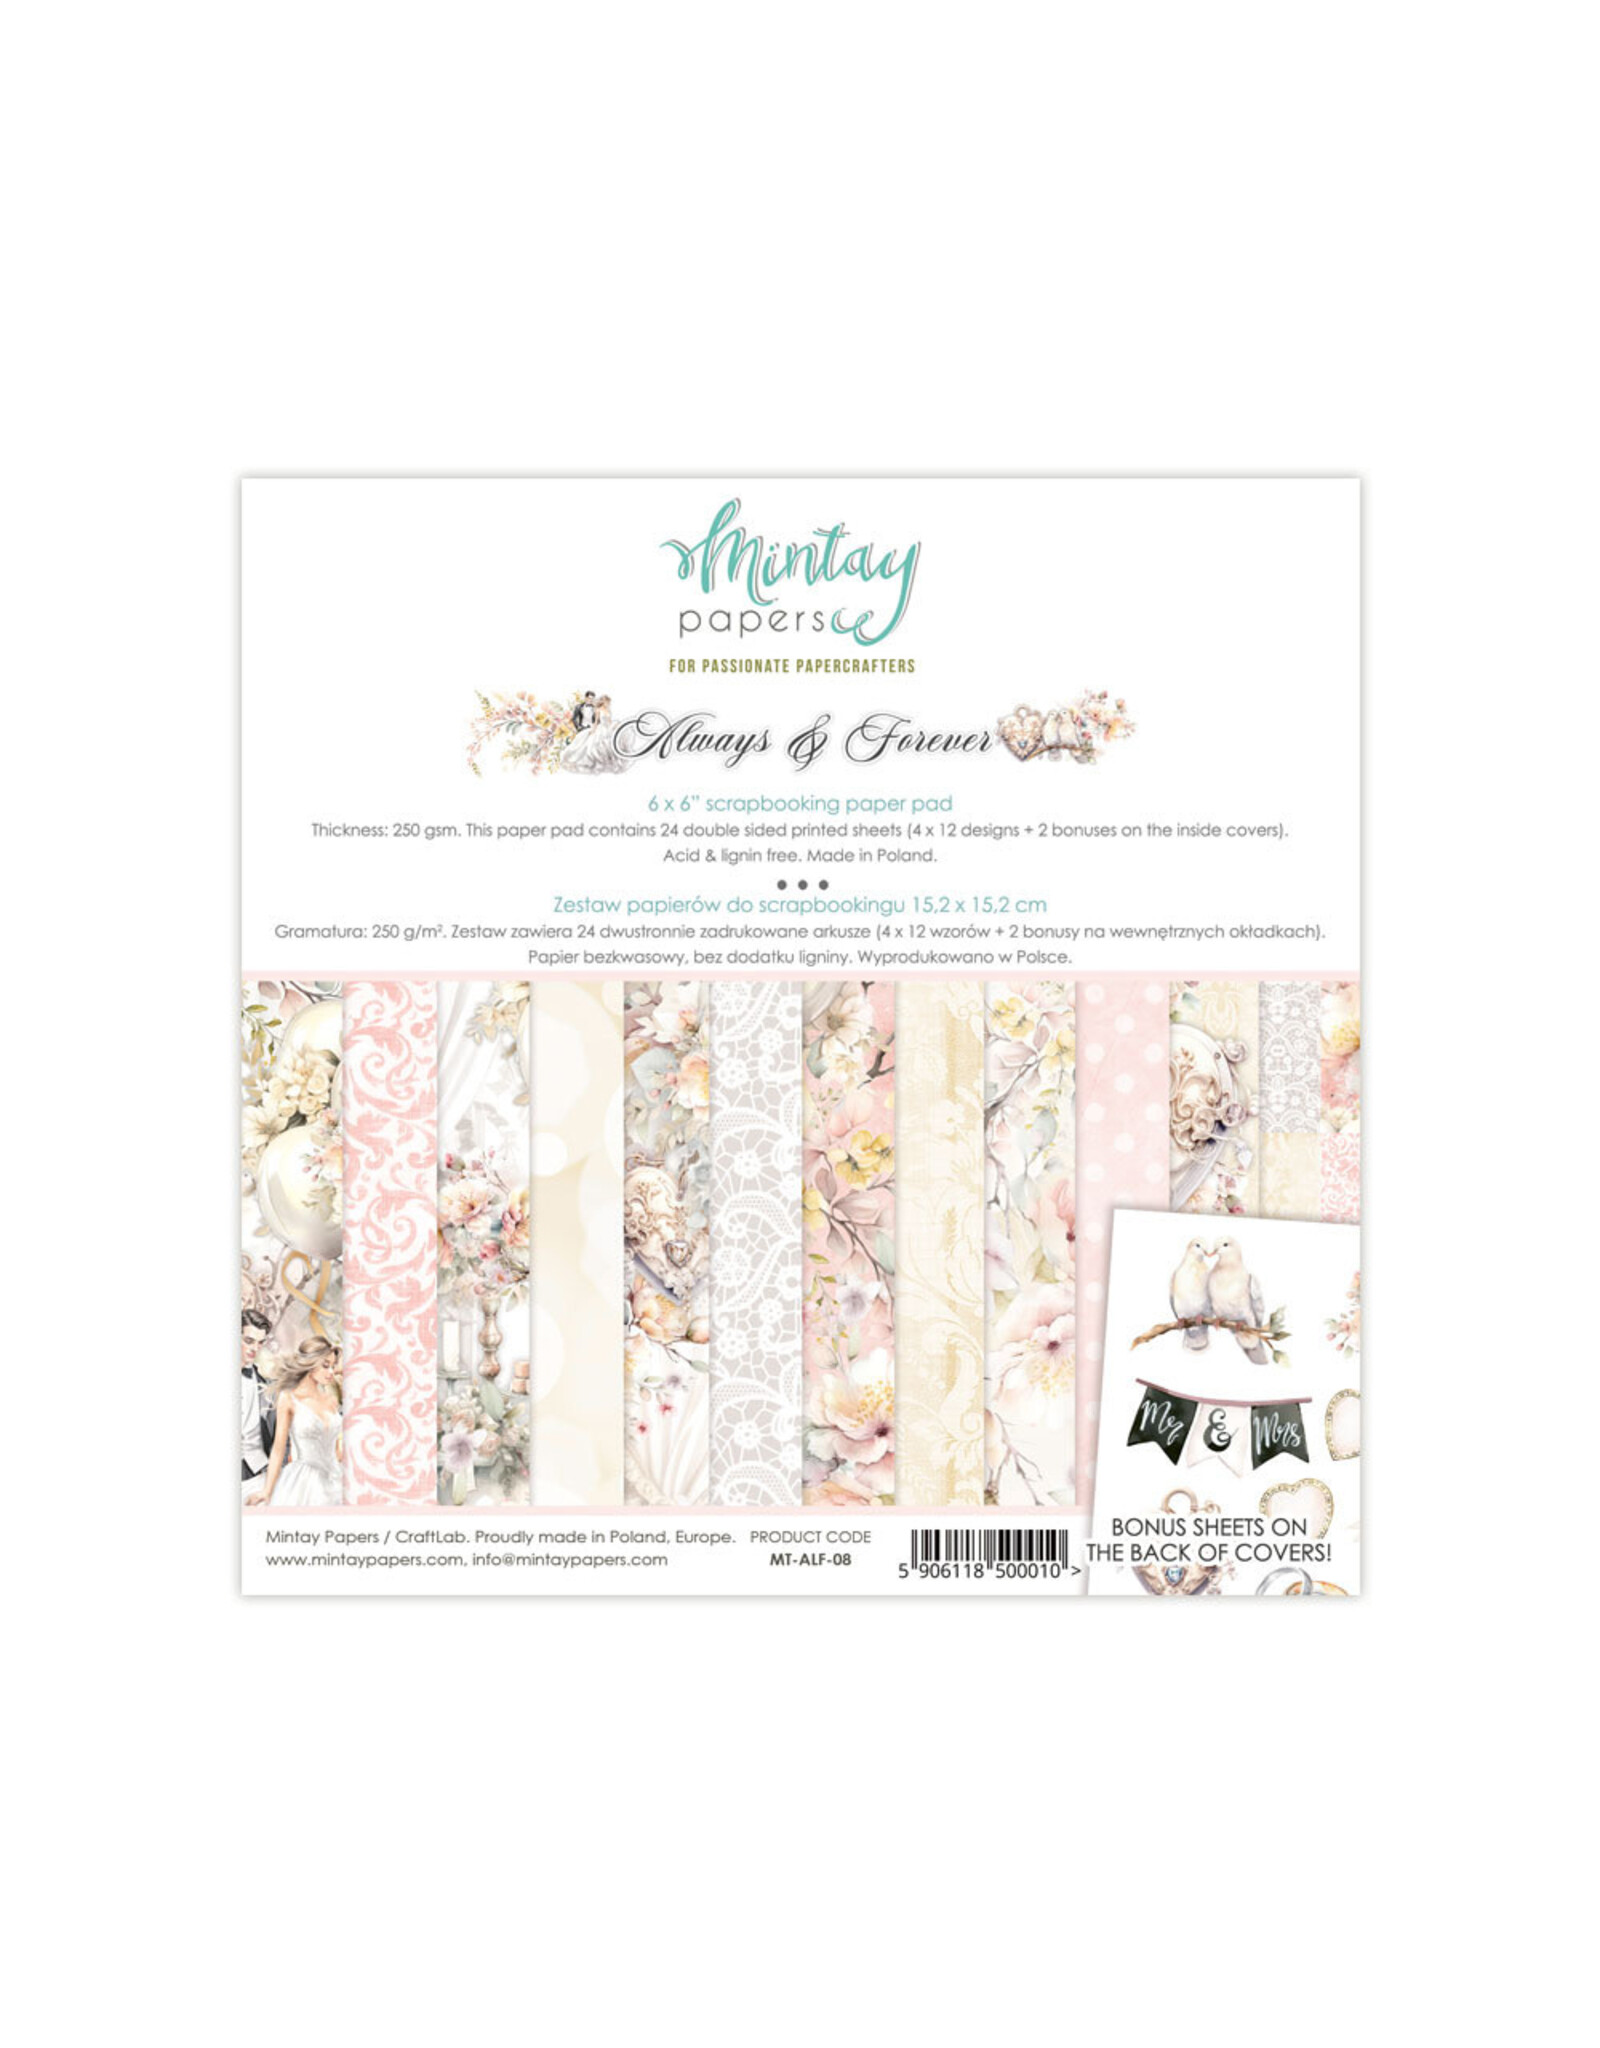 MINTAY MINTAY ALWAYS & FOREVER 6x6 PAPER PAD 24 SHEETS